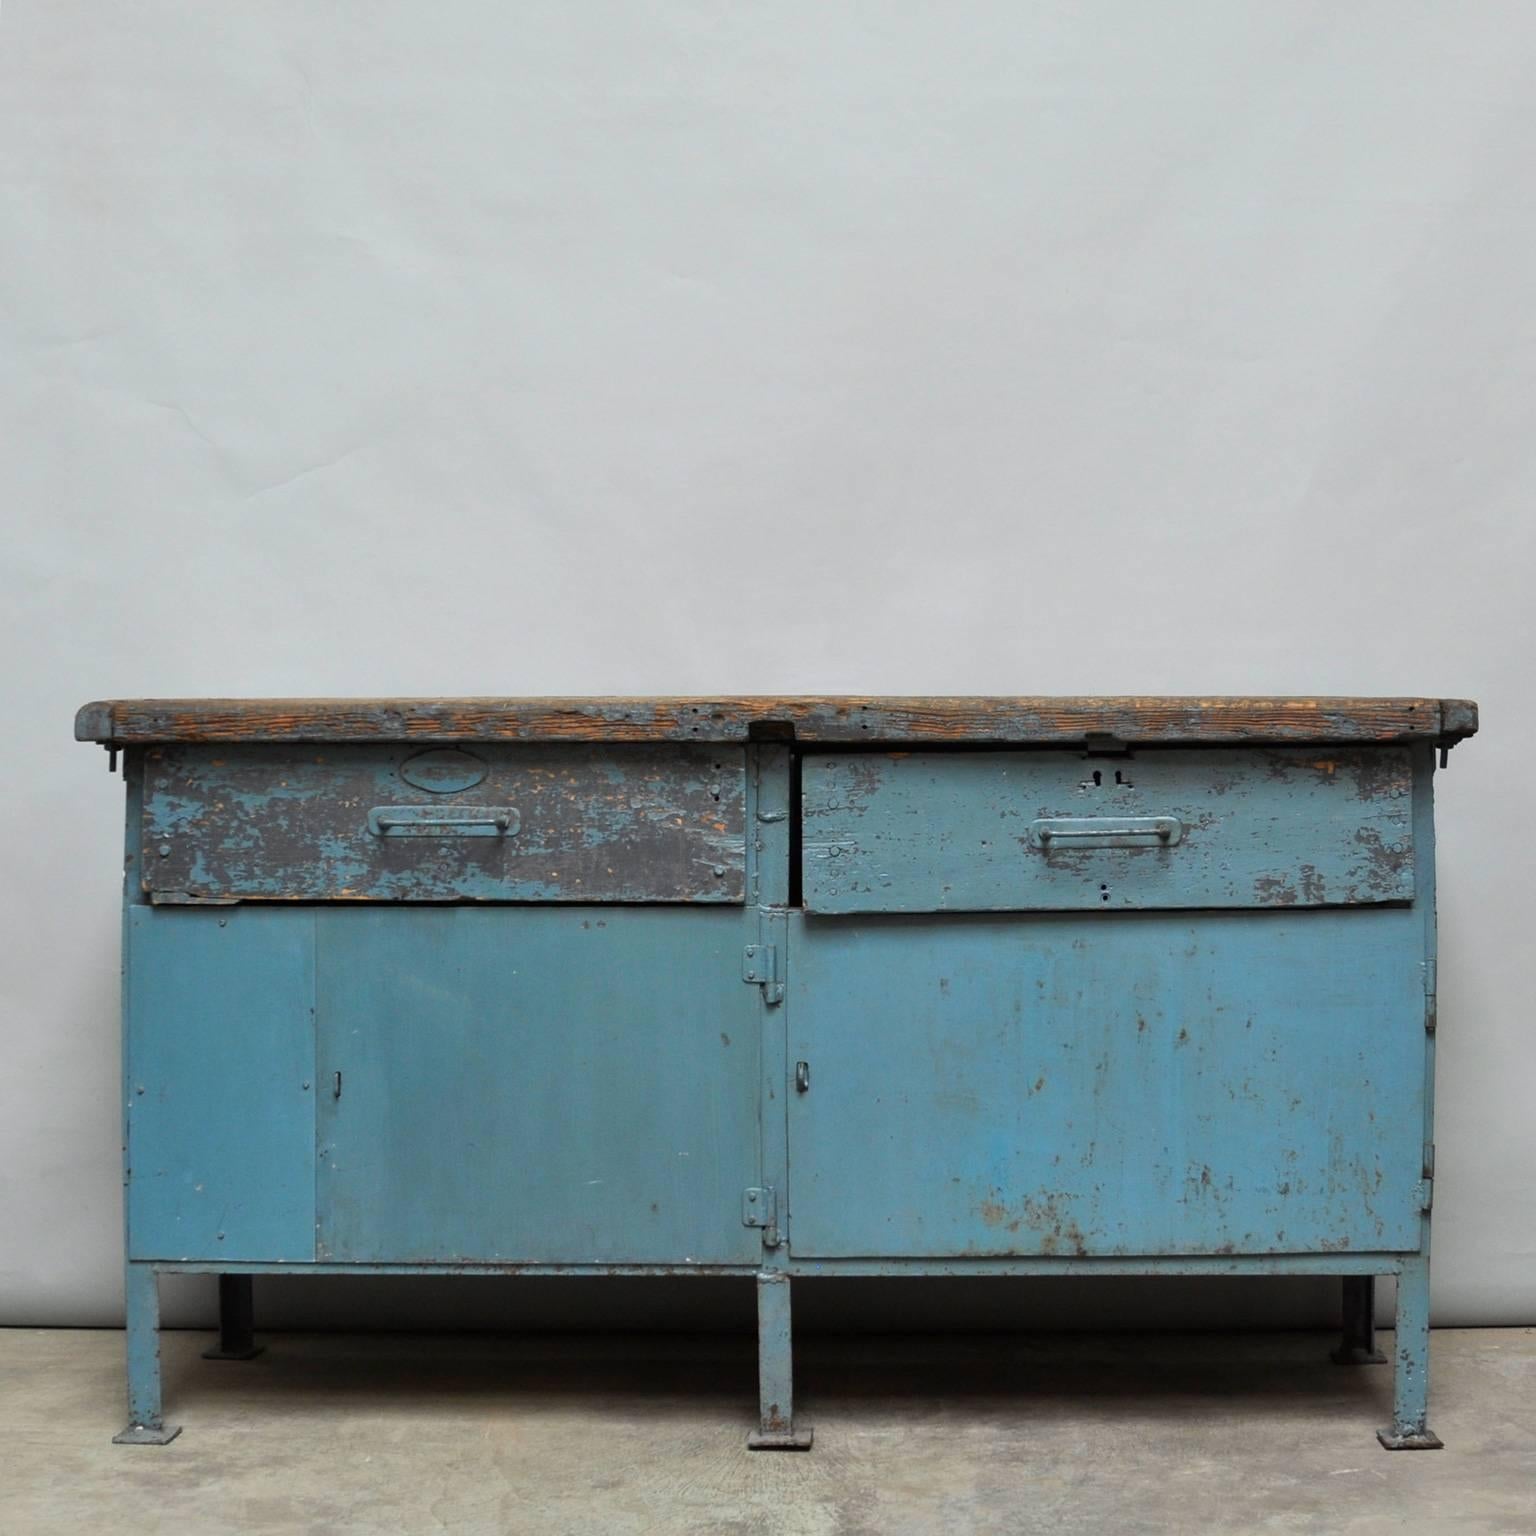 Vintage workshop table with metal structure. The top and the drawers are in solid pine. The top measures 5cm thick and presents an irregular surface as shown by the photos.